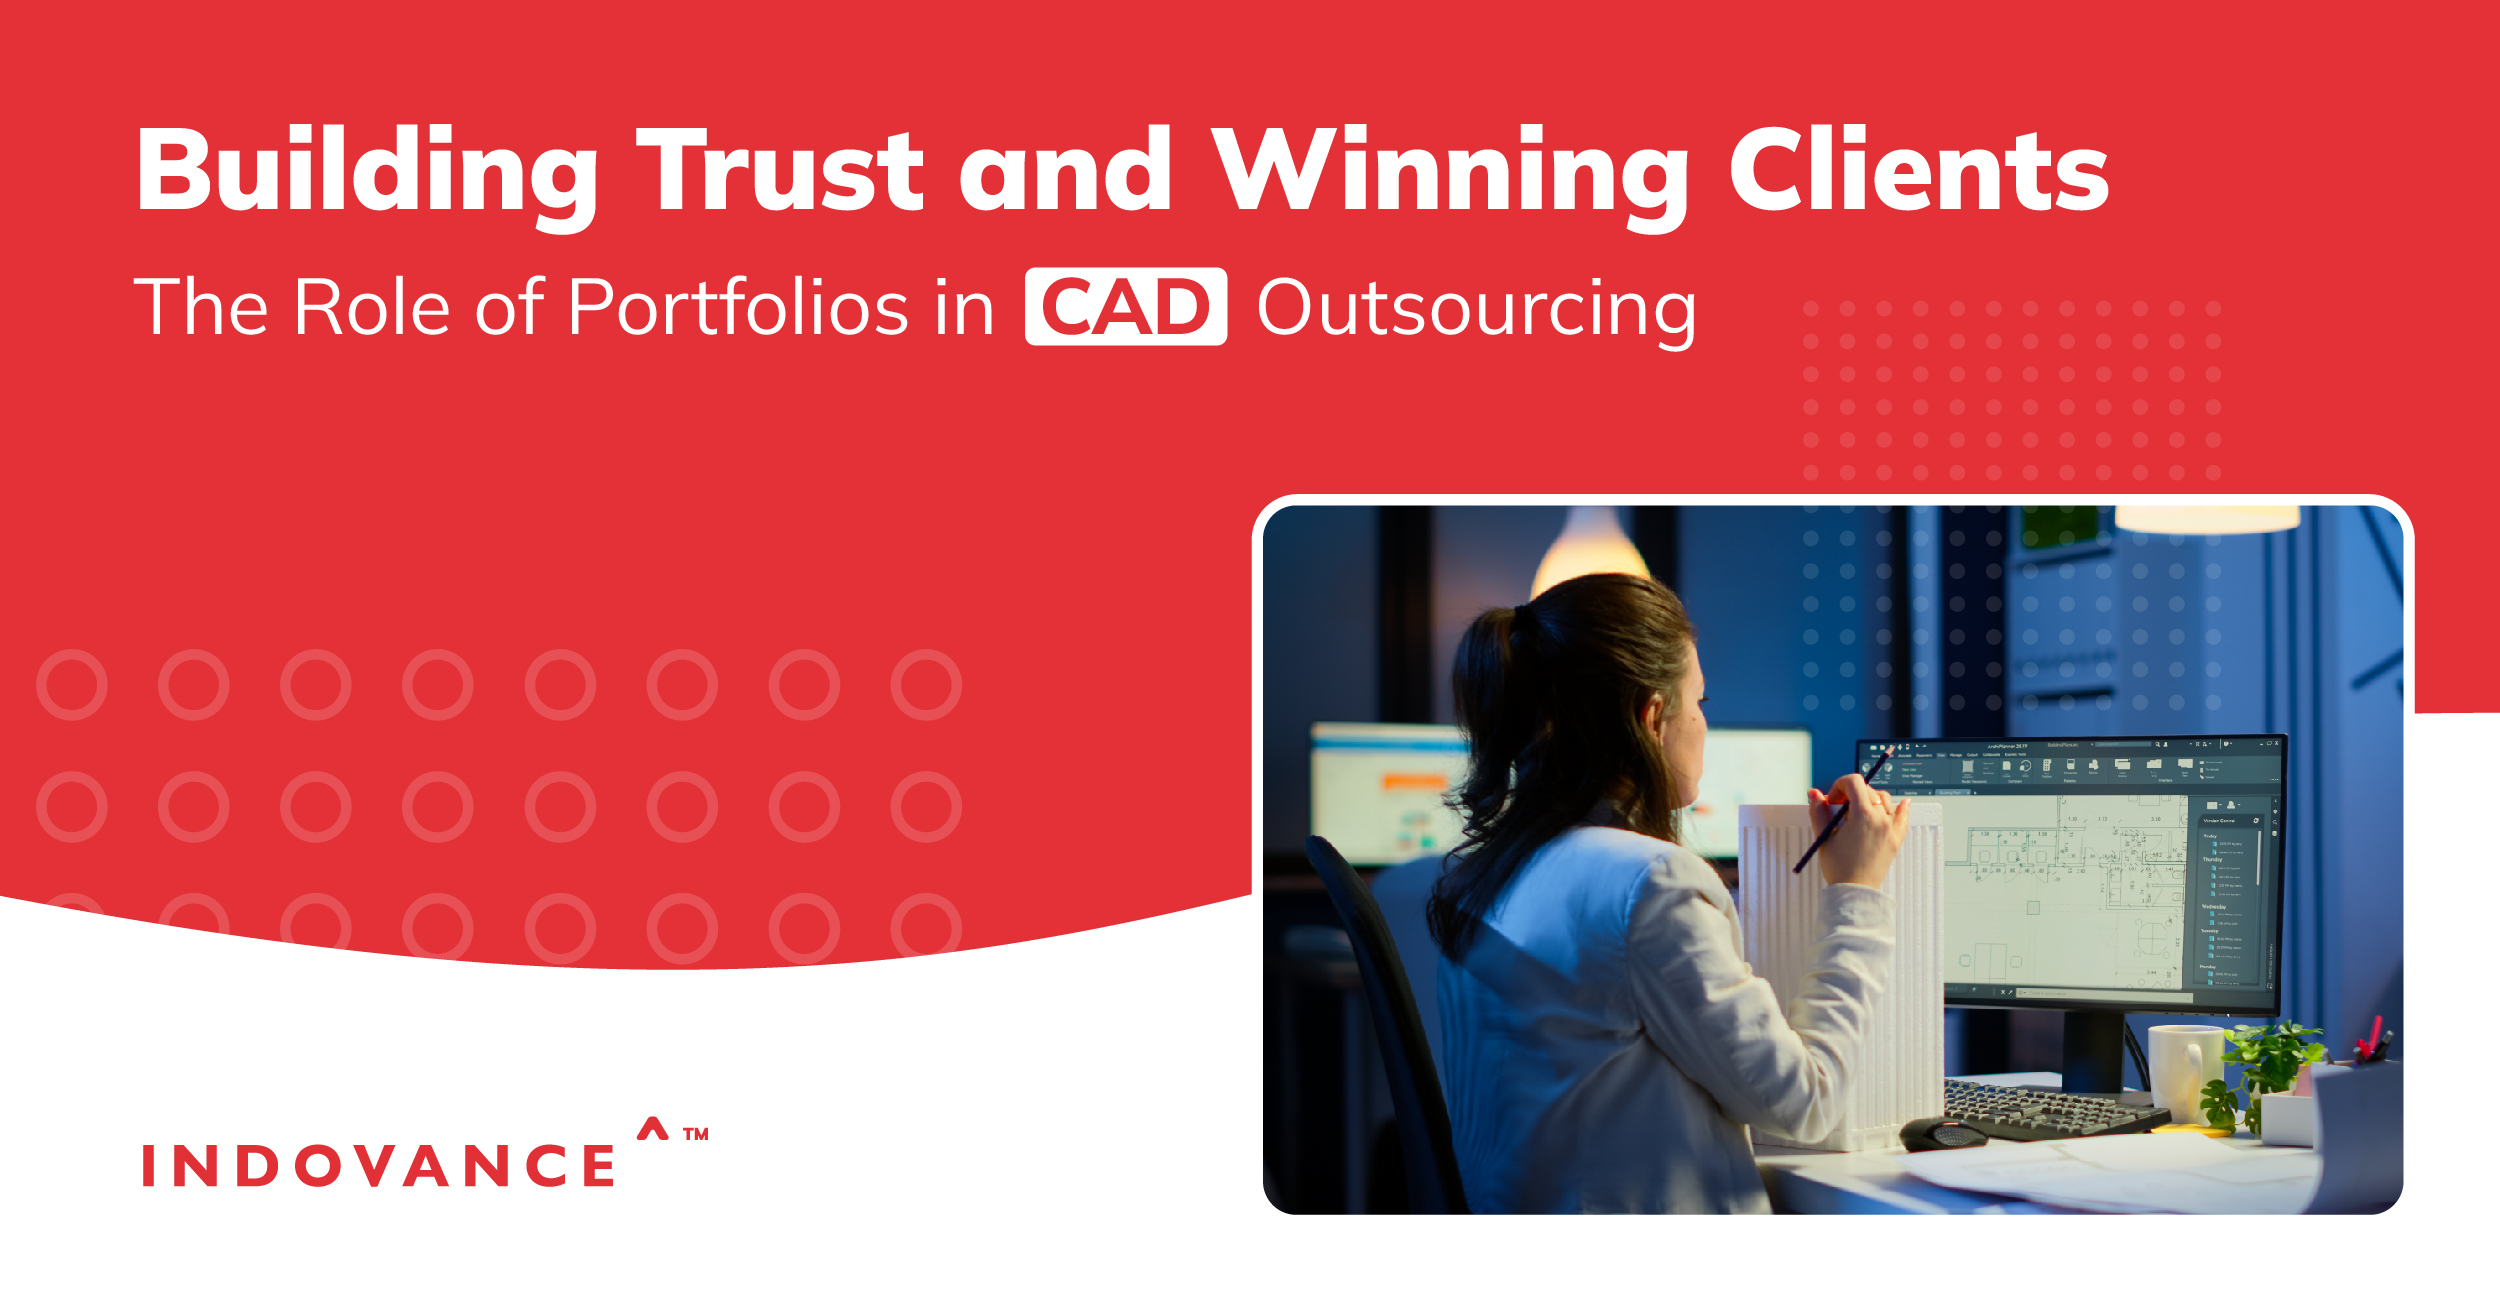 Building Trust and Winning Clients: The Role of Portfolio in CAD Outsourcing